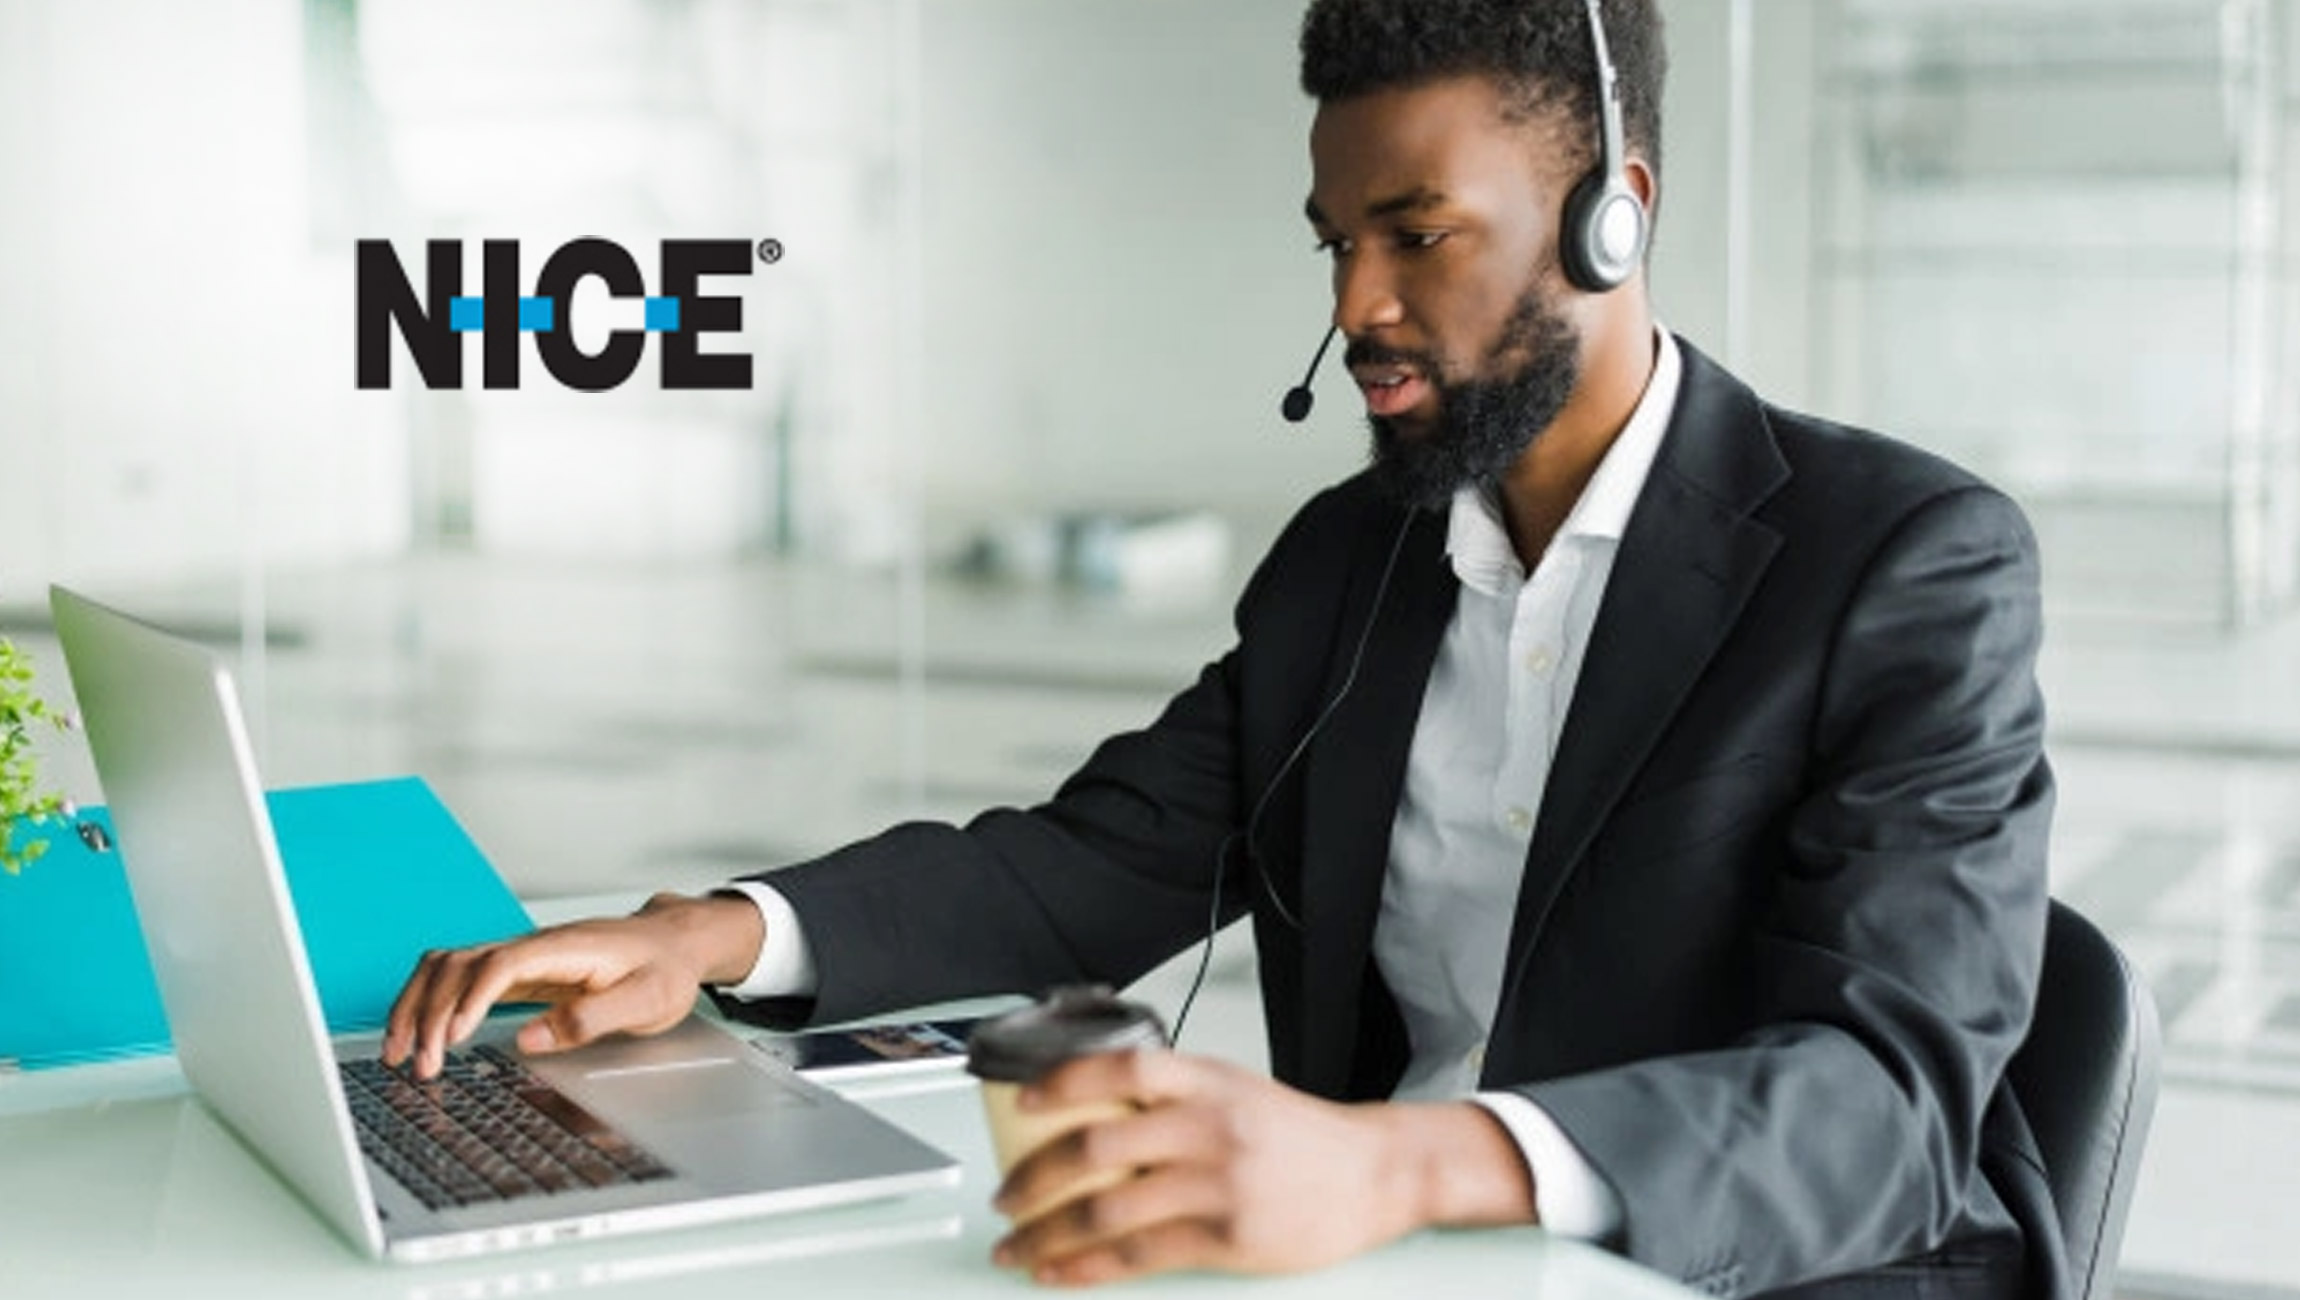 NICE Expands its Global Reach with Bell Canada